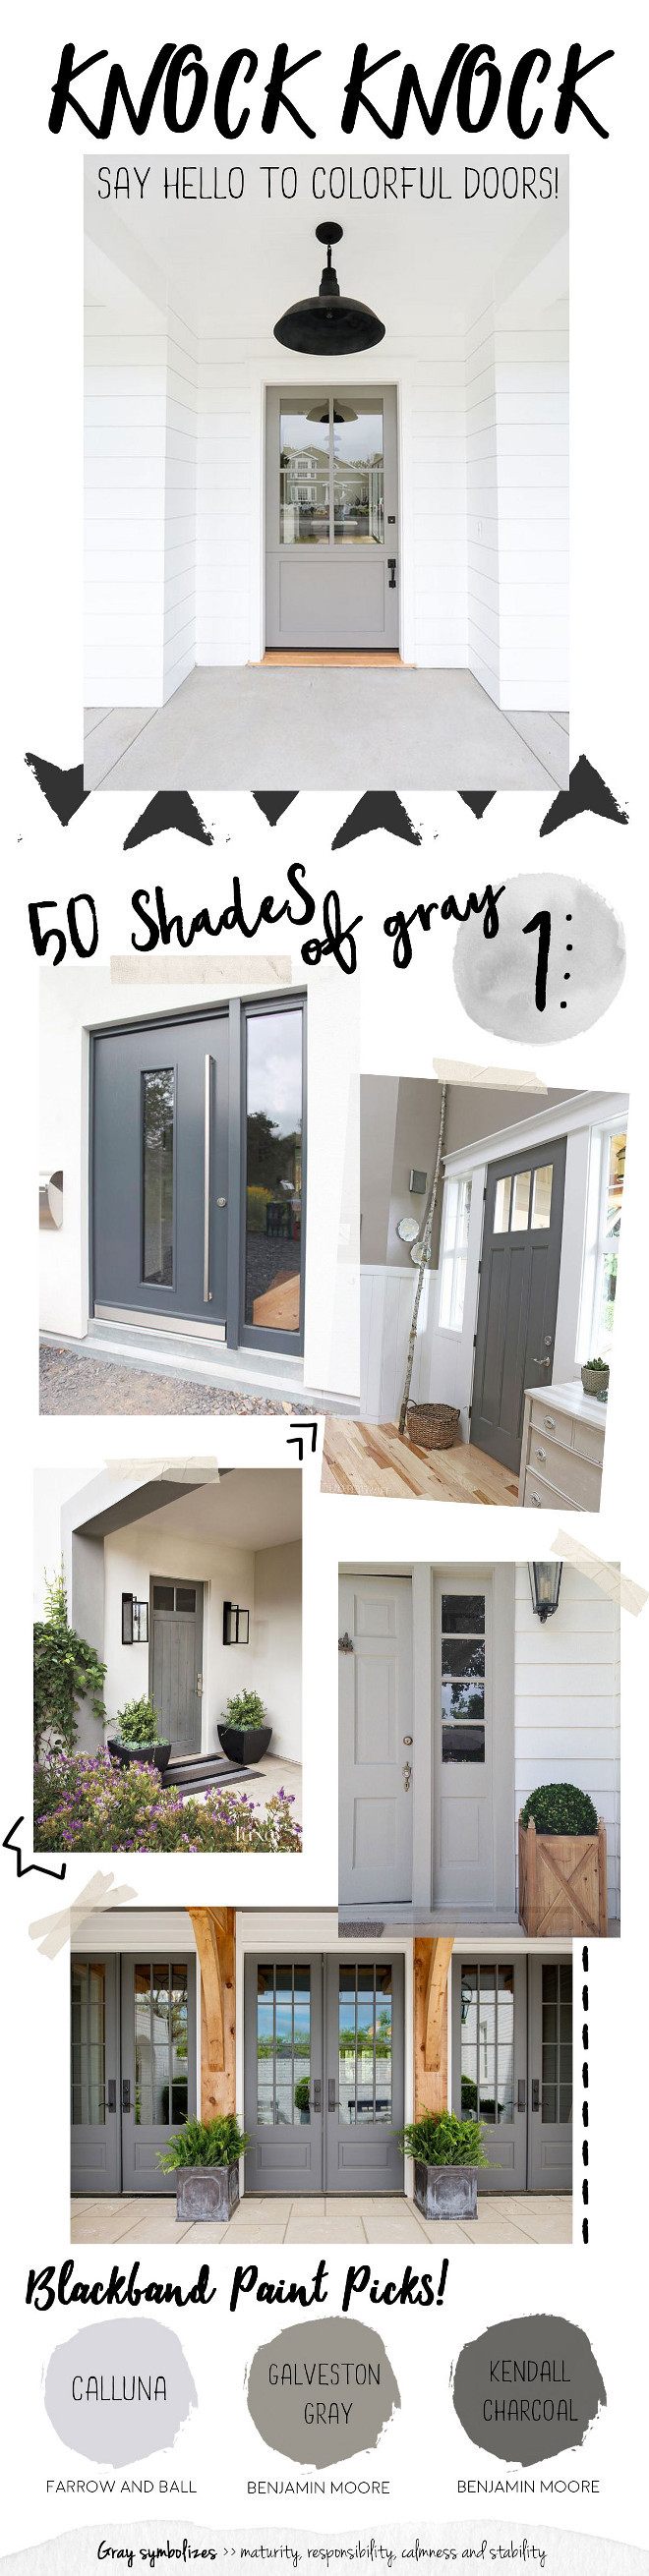 Gray Door Paint Color. Best grey front door paint colors. You simply can’t go wrong with a gray front door. Calluna by Farrow and Ball, Galveston Gray by Benjamin Moore. Kendall Charcoal by Benjamin Moore. #CallunabyFarrowandBall #GalvestonGraybyBenjaminMoore #KendallCharcoalbyBenjaminMoore